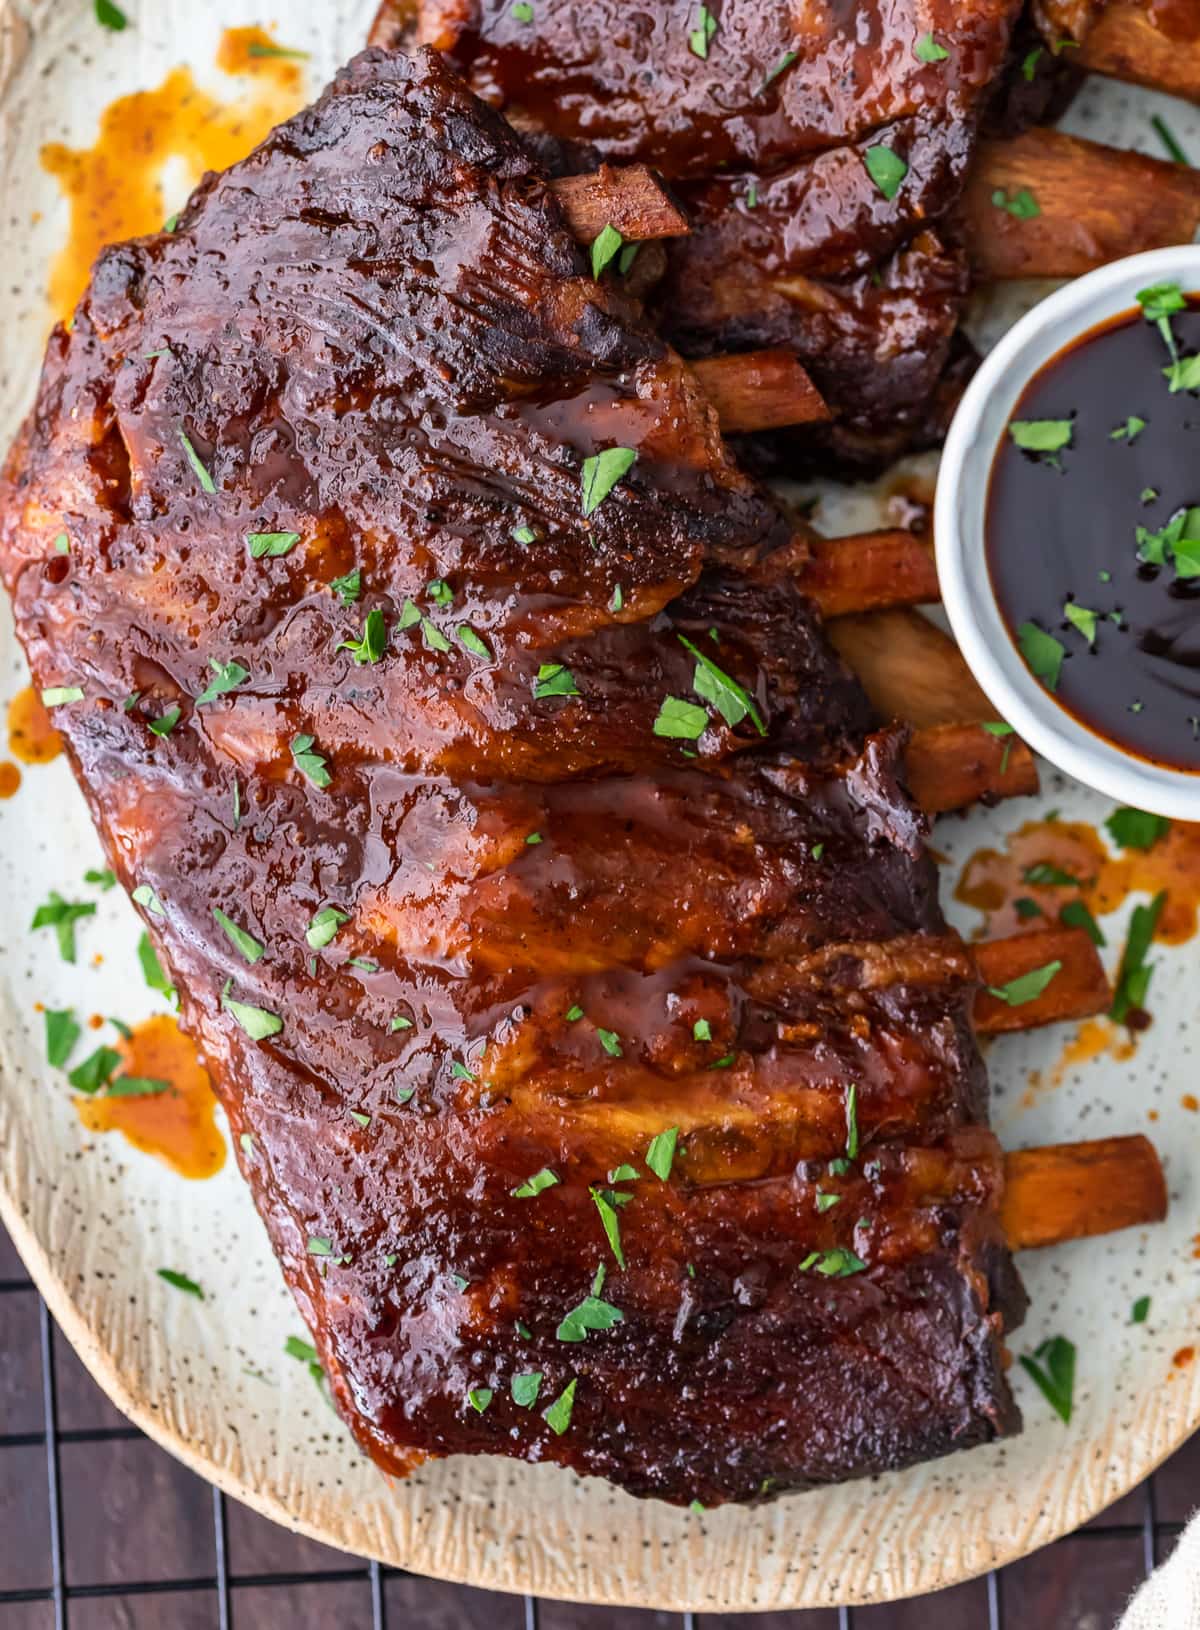 Crock Pot Ribs Slow Cooker Bbq Ribs Recipe How To Video,What Are Potstickers Served With